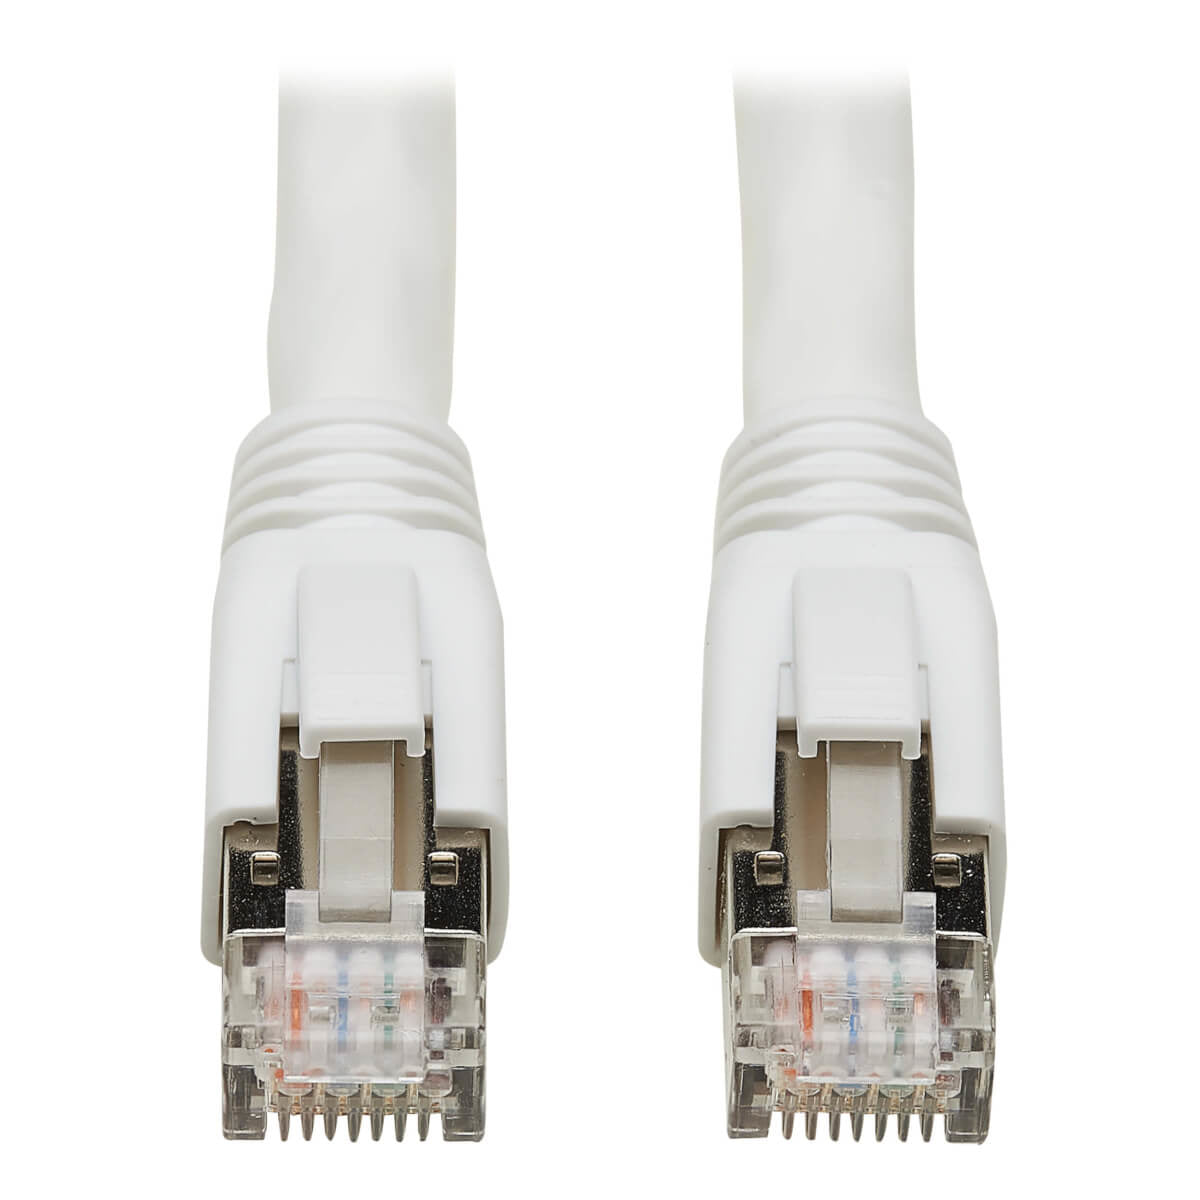 Tripp Lite N272-006-WH Cat8 25G/40G Certified Snagless Shielded S/FTP Ethernet Cable (RJ45 M/M), PoE, White, 6 ft. (1.83 m)